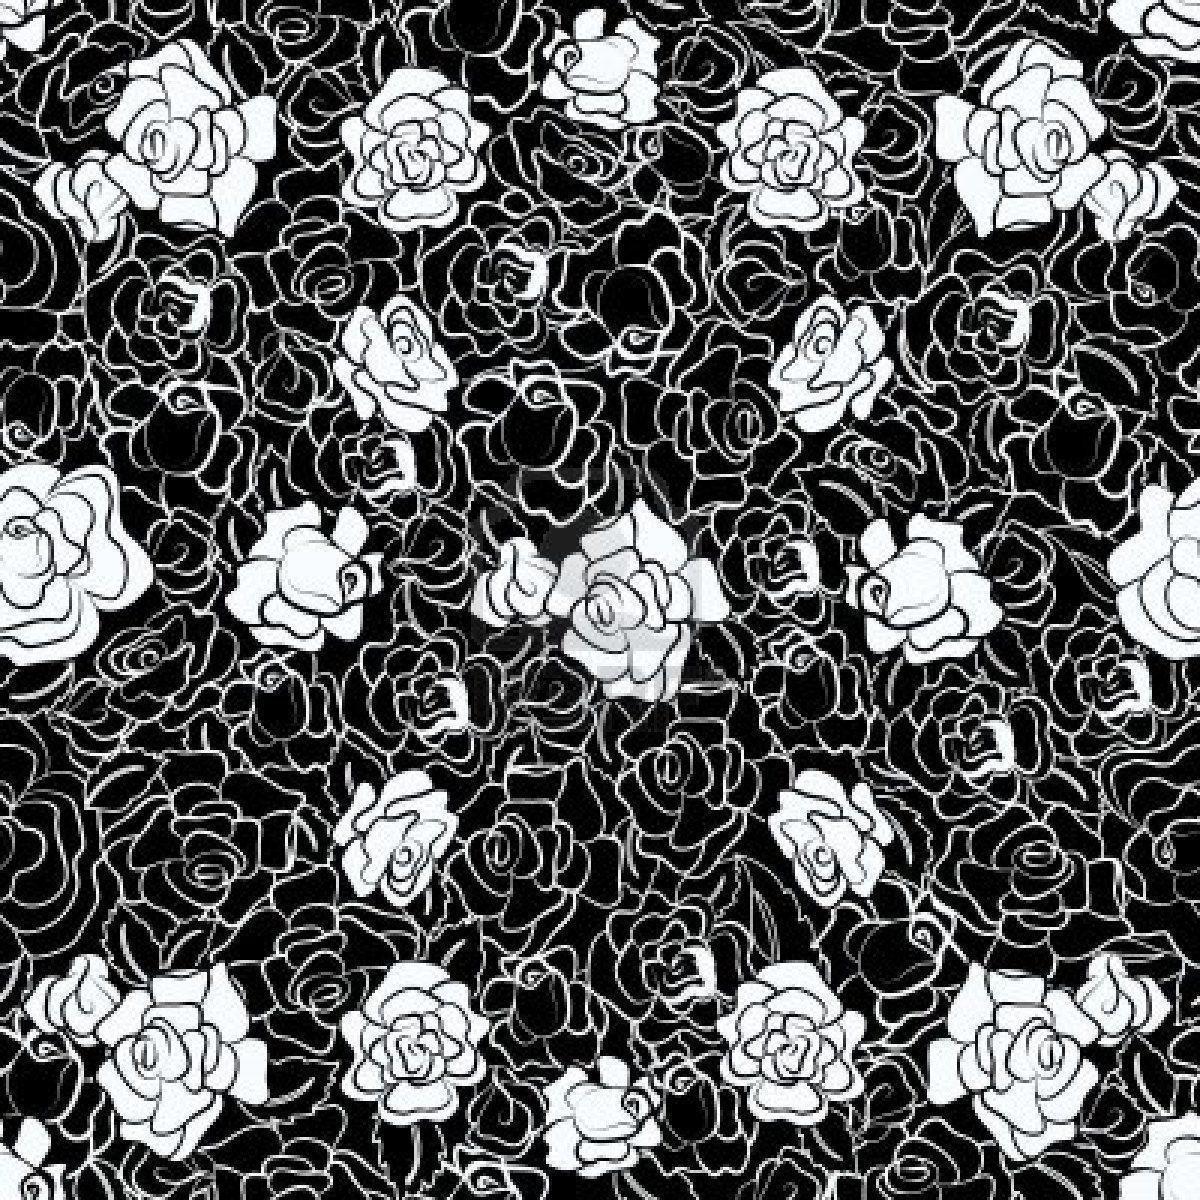 Black and white rose repeating pattern 9783305